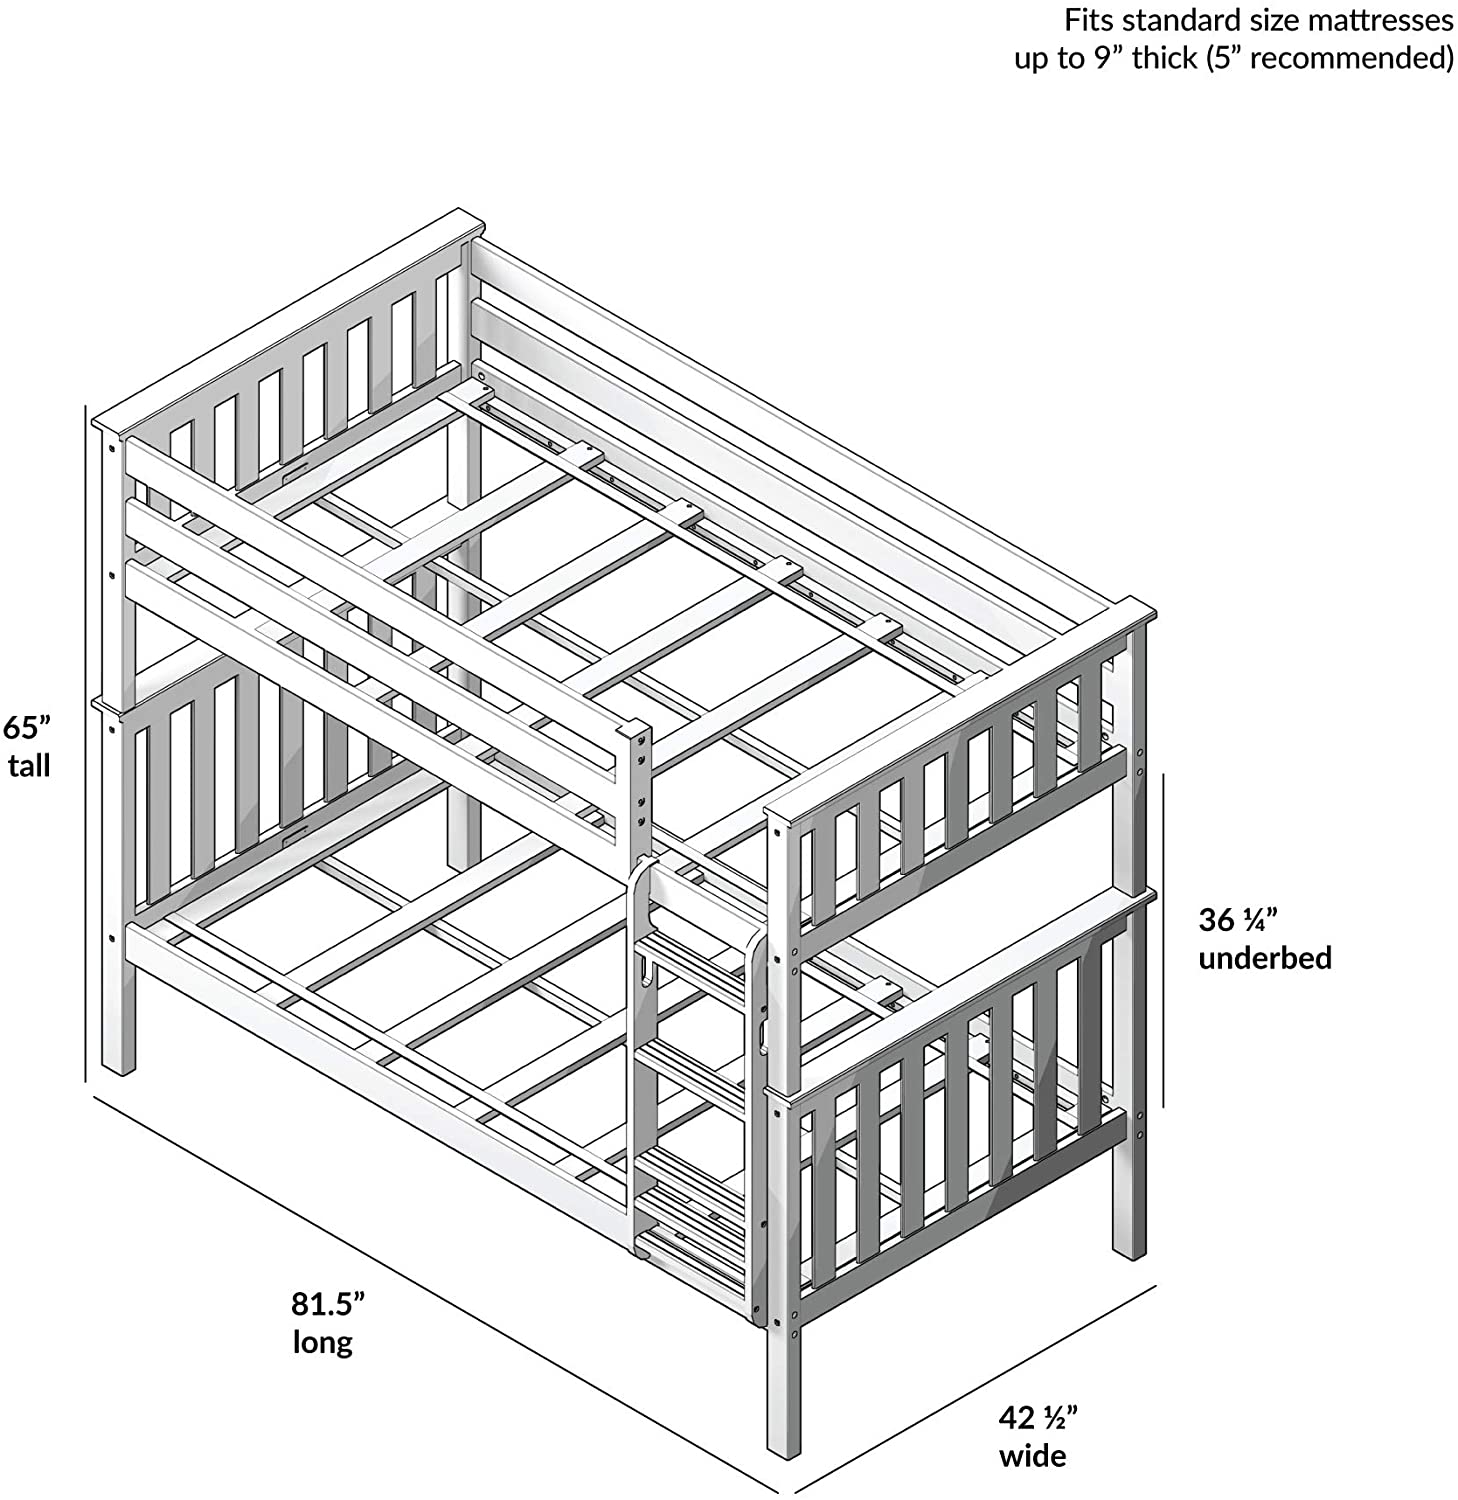 Max & Lily Bunk Bed, Twin-Over-Twin Wood Bed Frame For Kids, Natural-$270